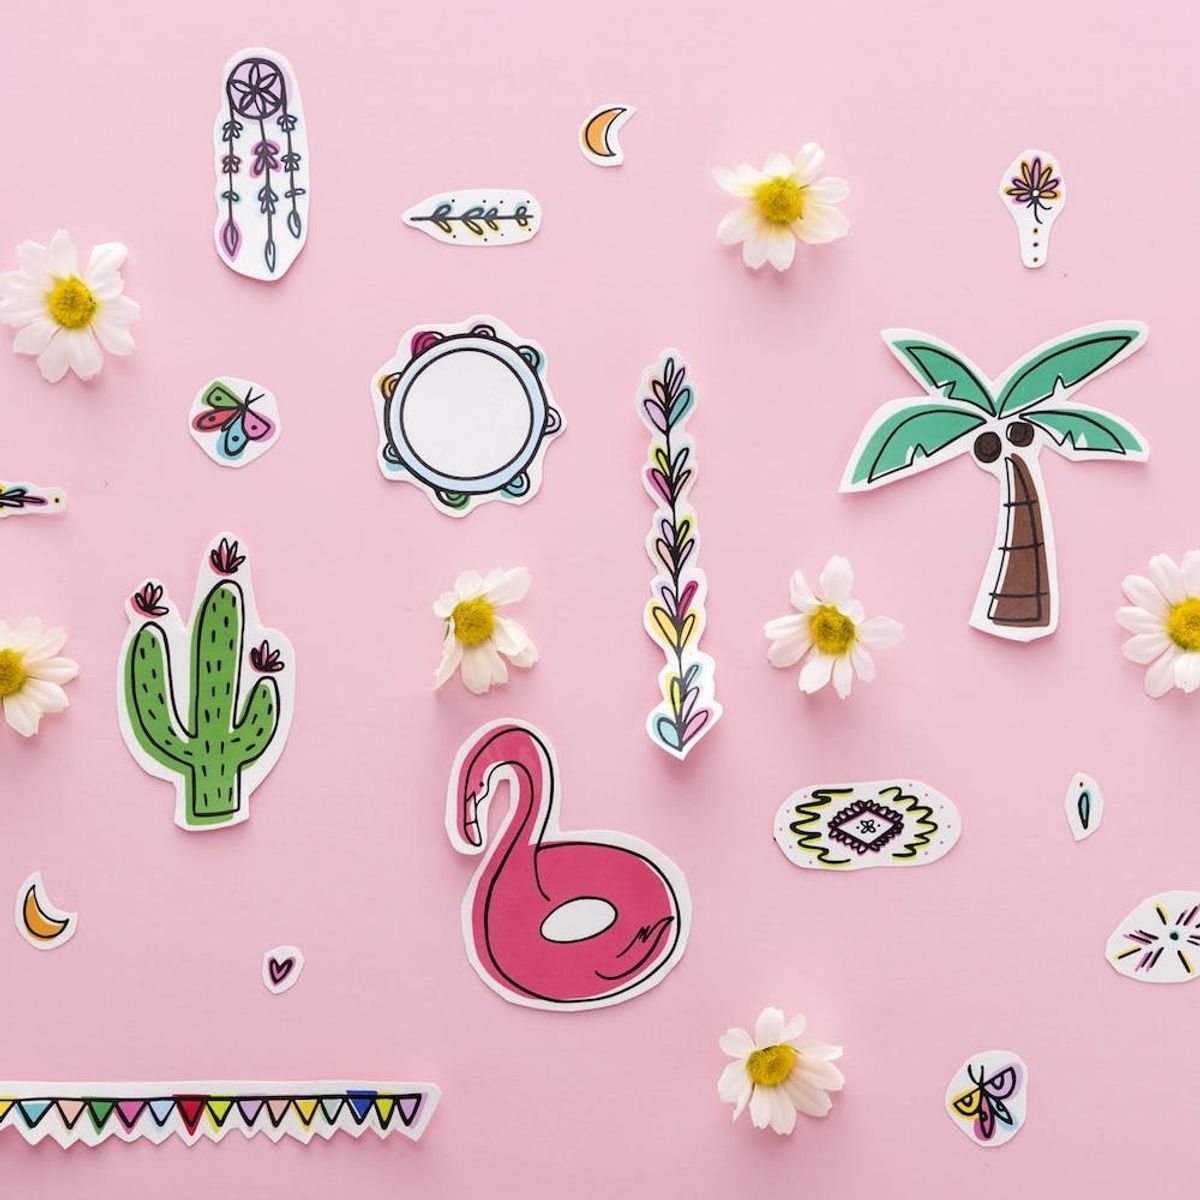 These Free Temporary Tattoos Are Perfect for Festival Season